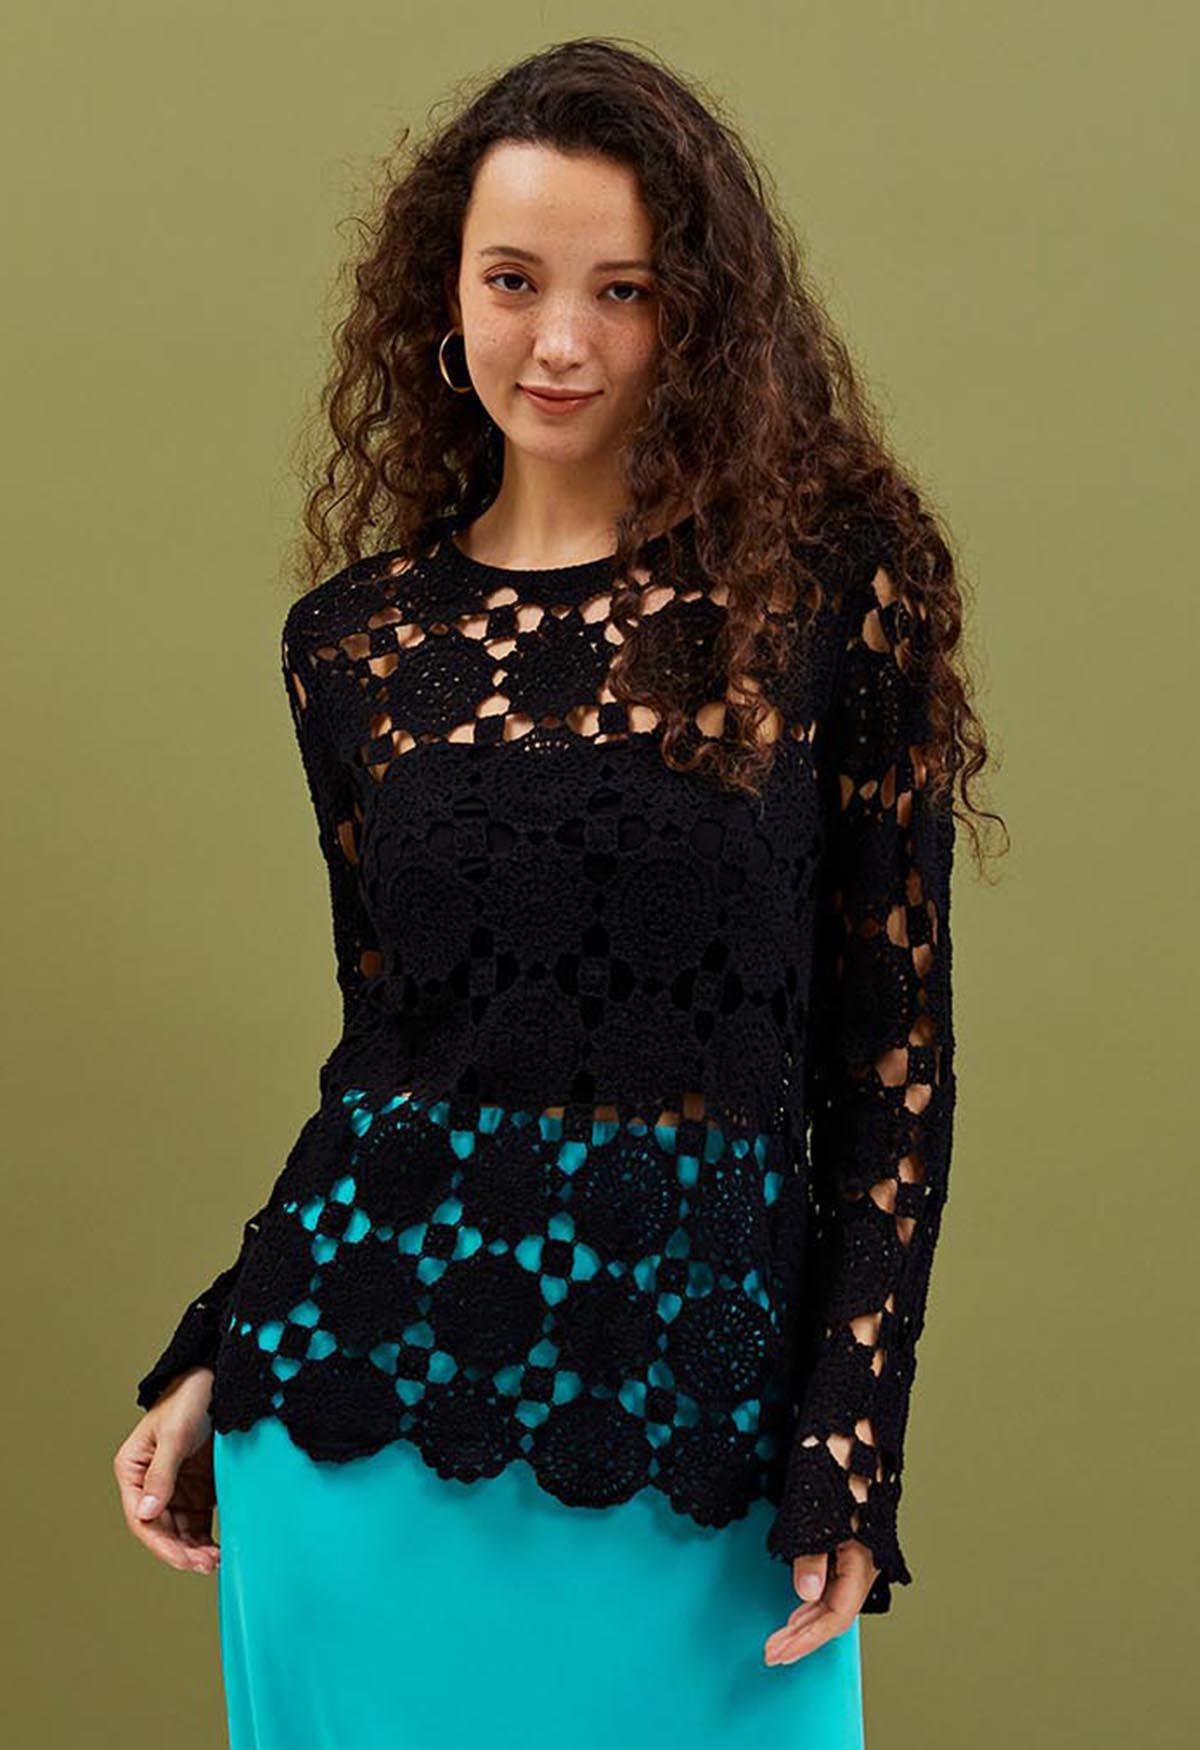 Relaxed Floral and Check Crochet Top in Black